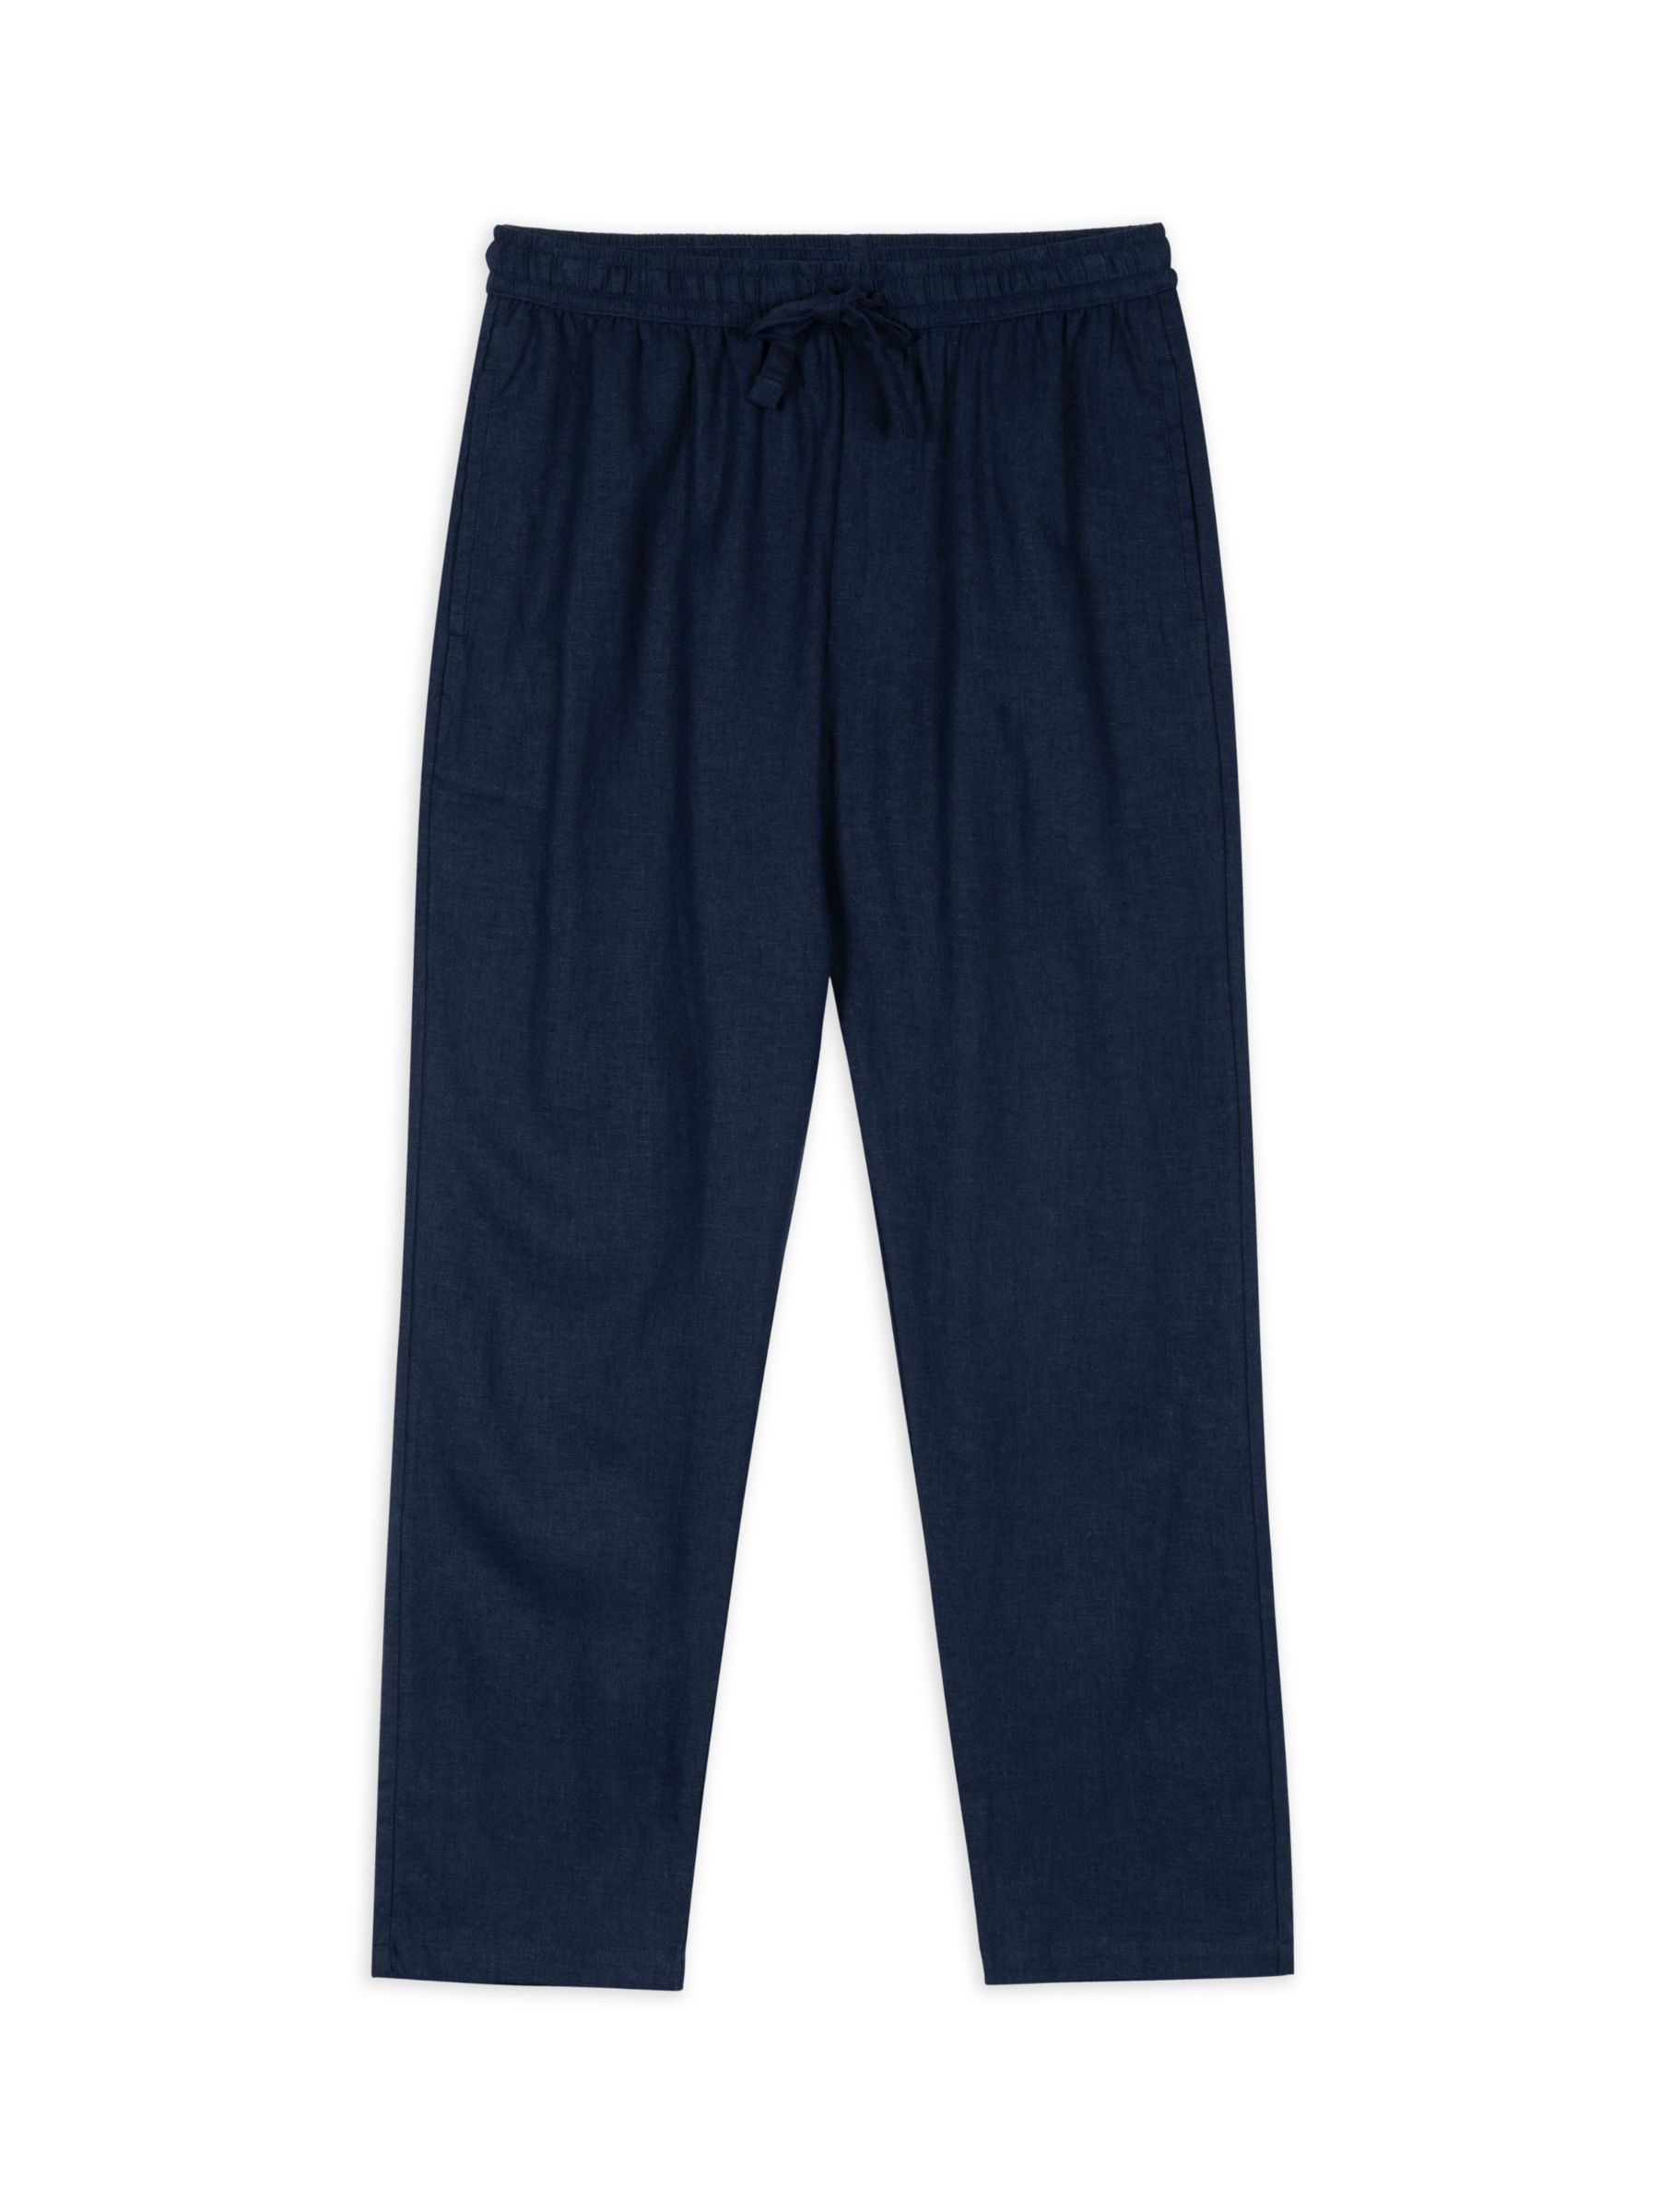 Buy Chelsea Peers Linen Blend Relaxed Trousers, Navy Online at johnlewis.com